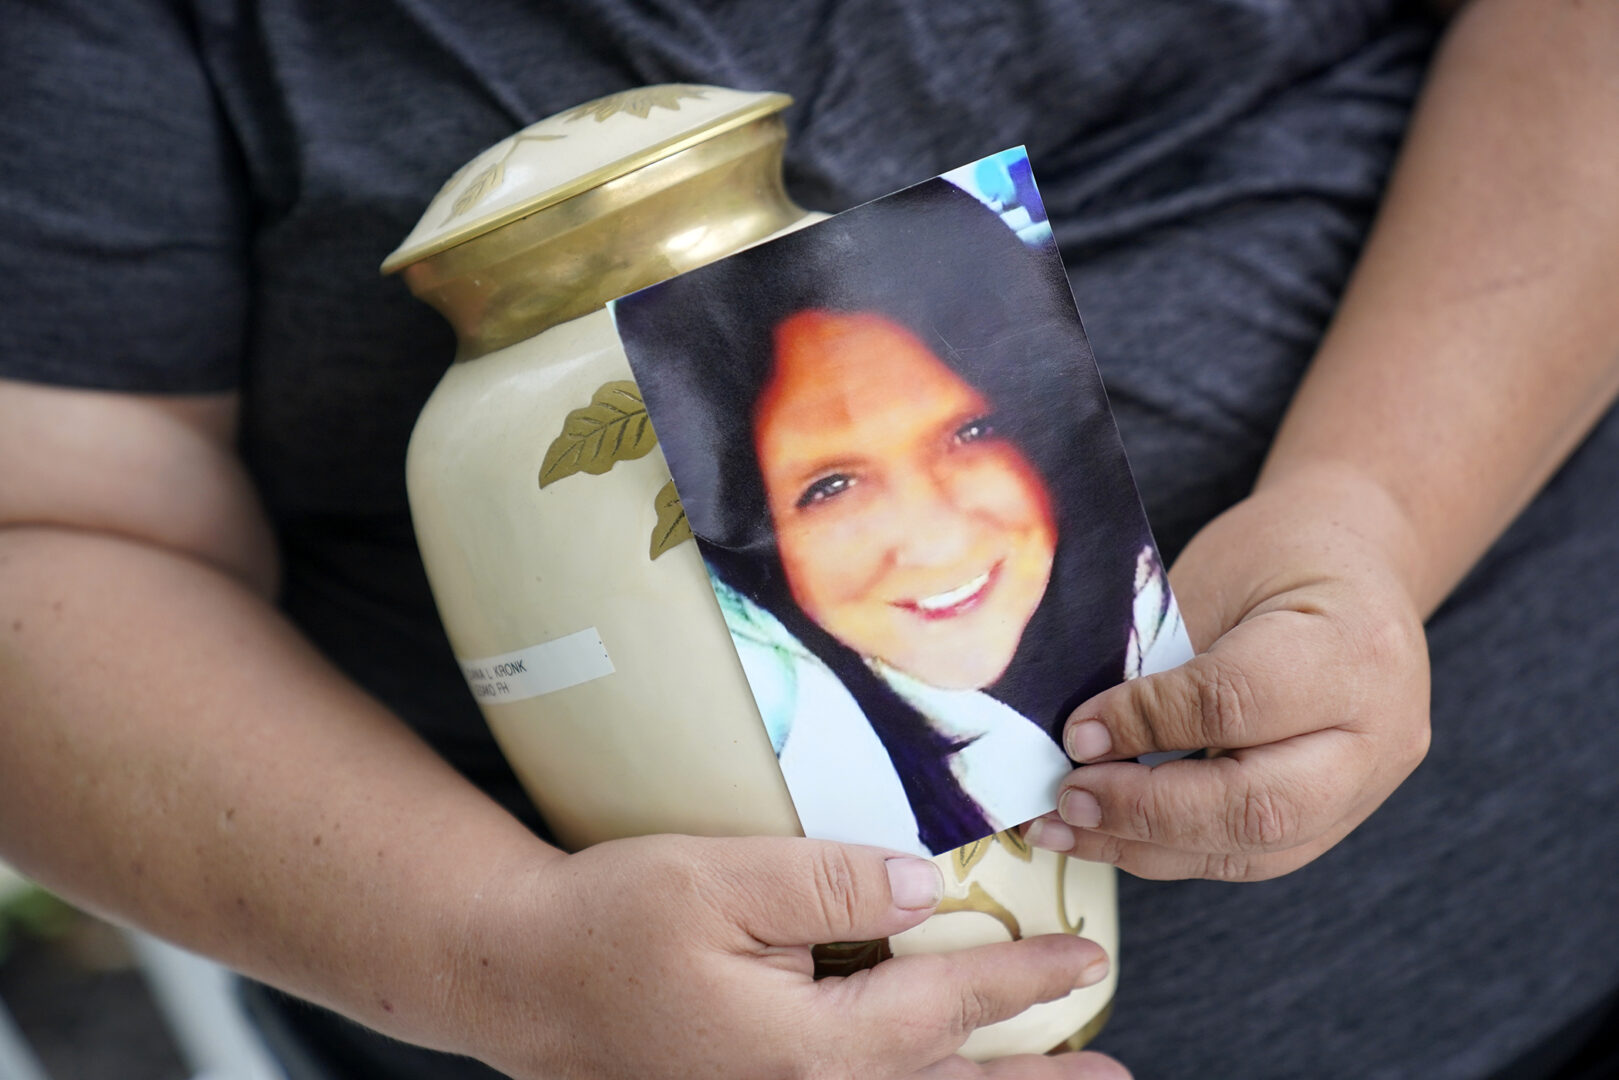 Kelly Titchenell sits on her porch in Mather, Pa., holding a photo of her mother Diania Kronk, and an urn containing her mother's ashes, Thursday, July 7, 2022. A Greene County, Pa., detective last week filed charges against 911 operator Leon “Lee” Price, 50, of Waynesburg, in the July 2020 death of Diania Kronk, 54, based on Price's reluctance to dispatch help without getting more assurance that Kronk would actually go to the hospital. (AP Photo/Gene J. Puskar)